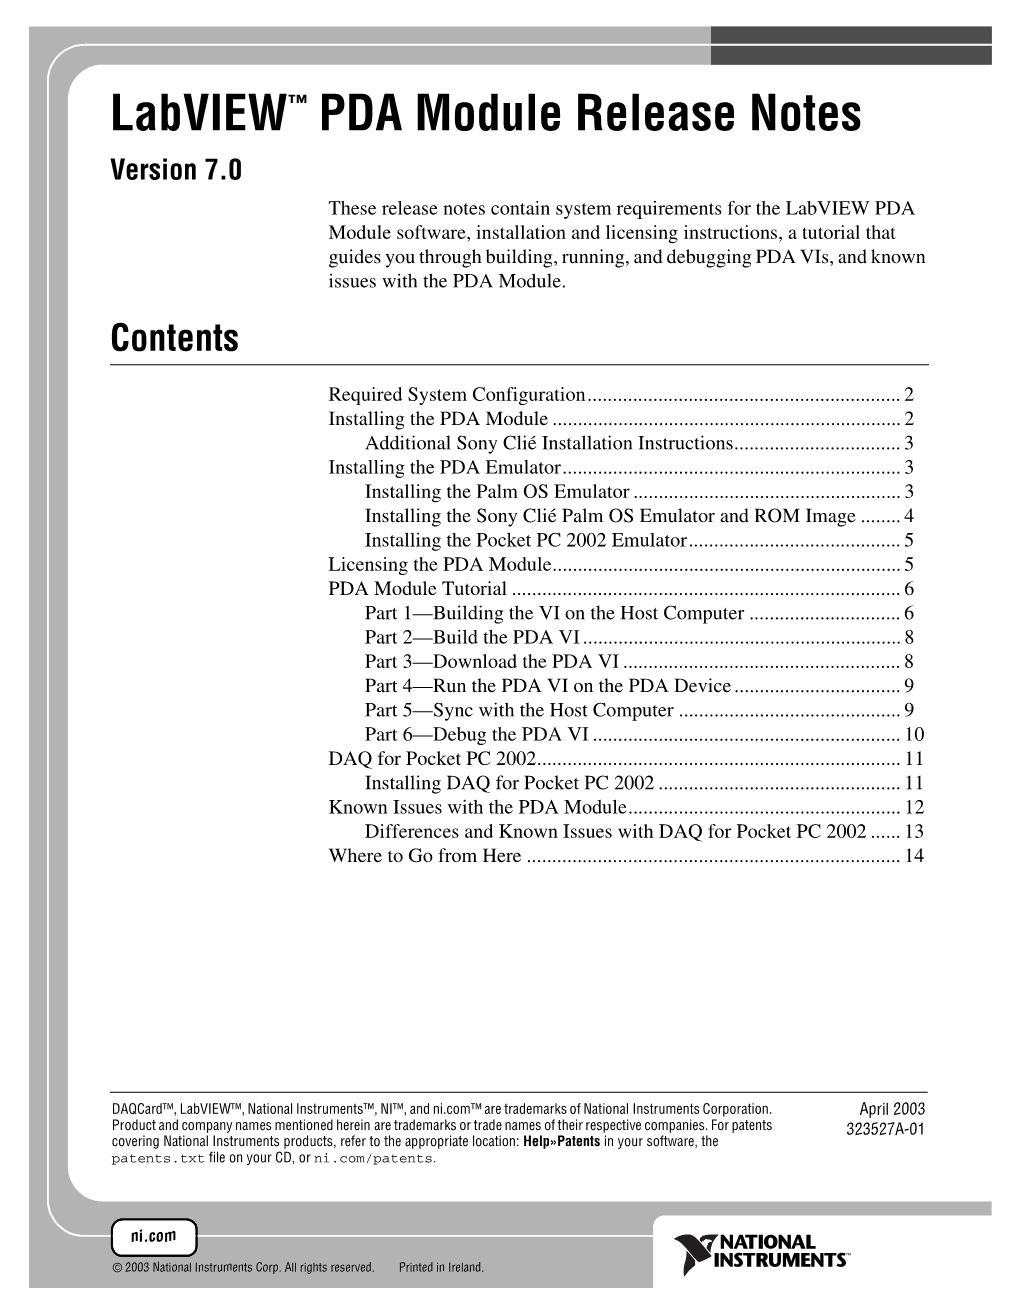 Labview PDA Module Release Notes